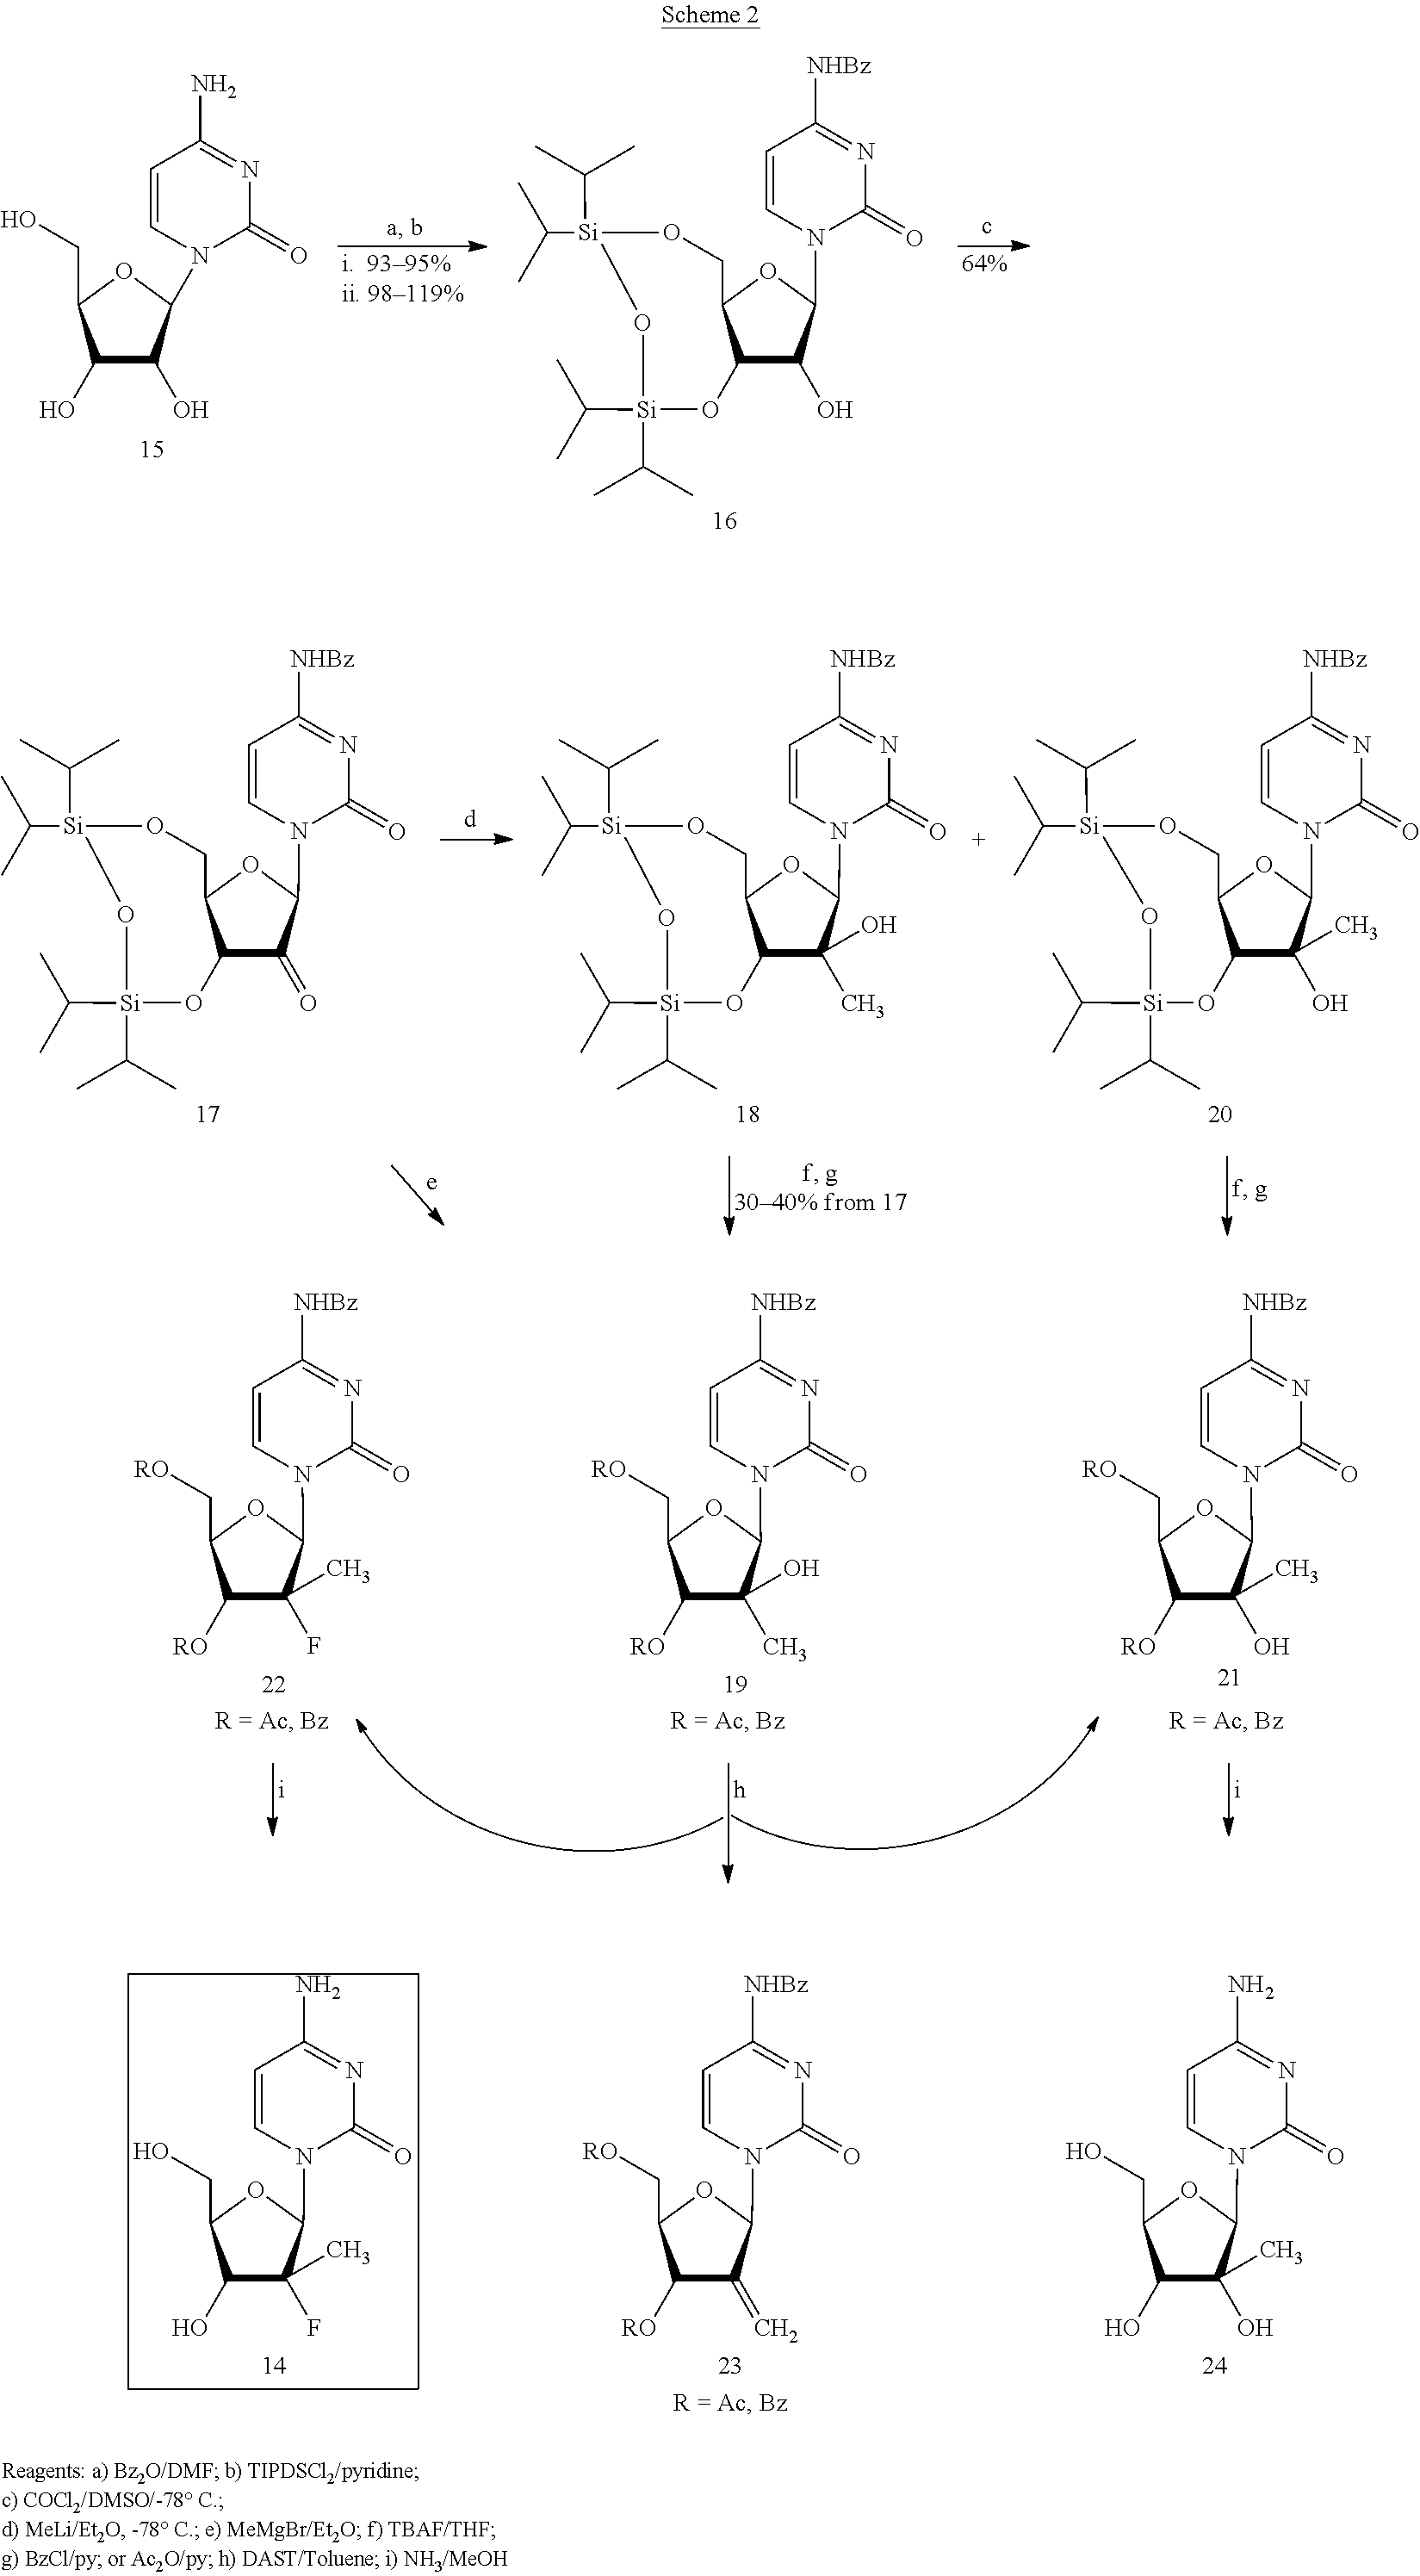 Preparation of 2'-fluoro-2'-alkyl-substituted or other optionally substituted ribofuranosyl pyrimidines and purines and their derivatives